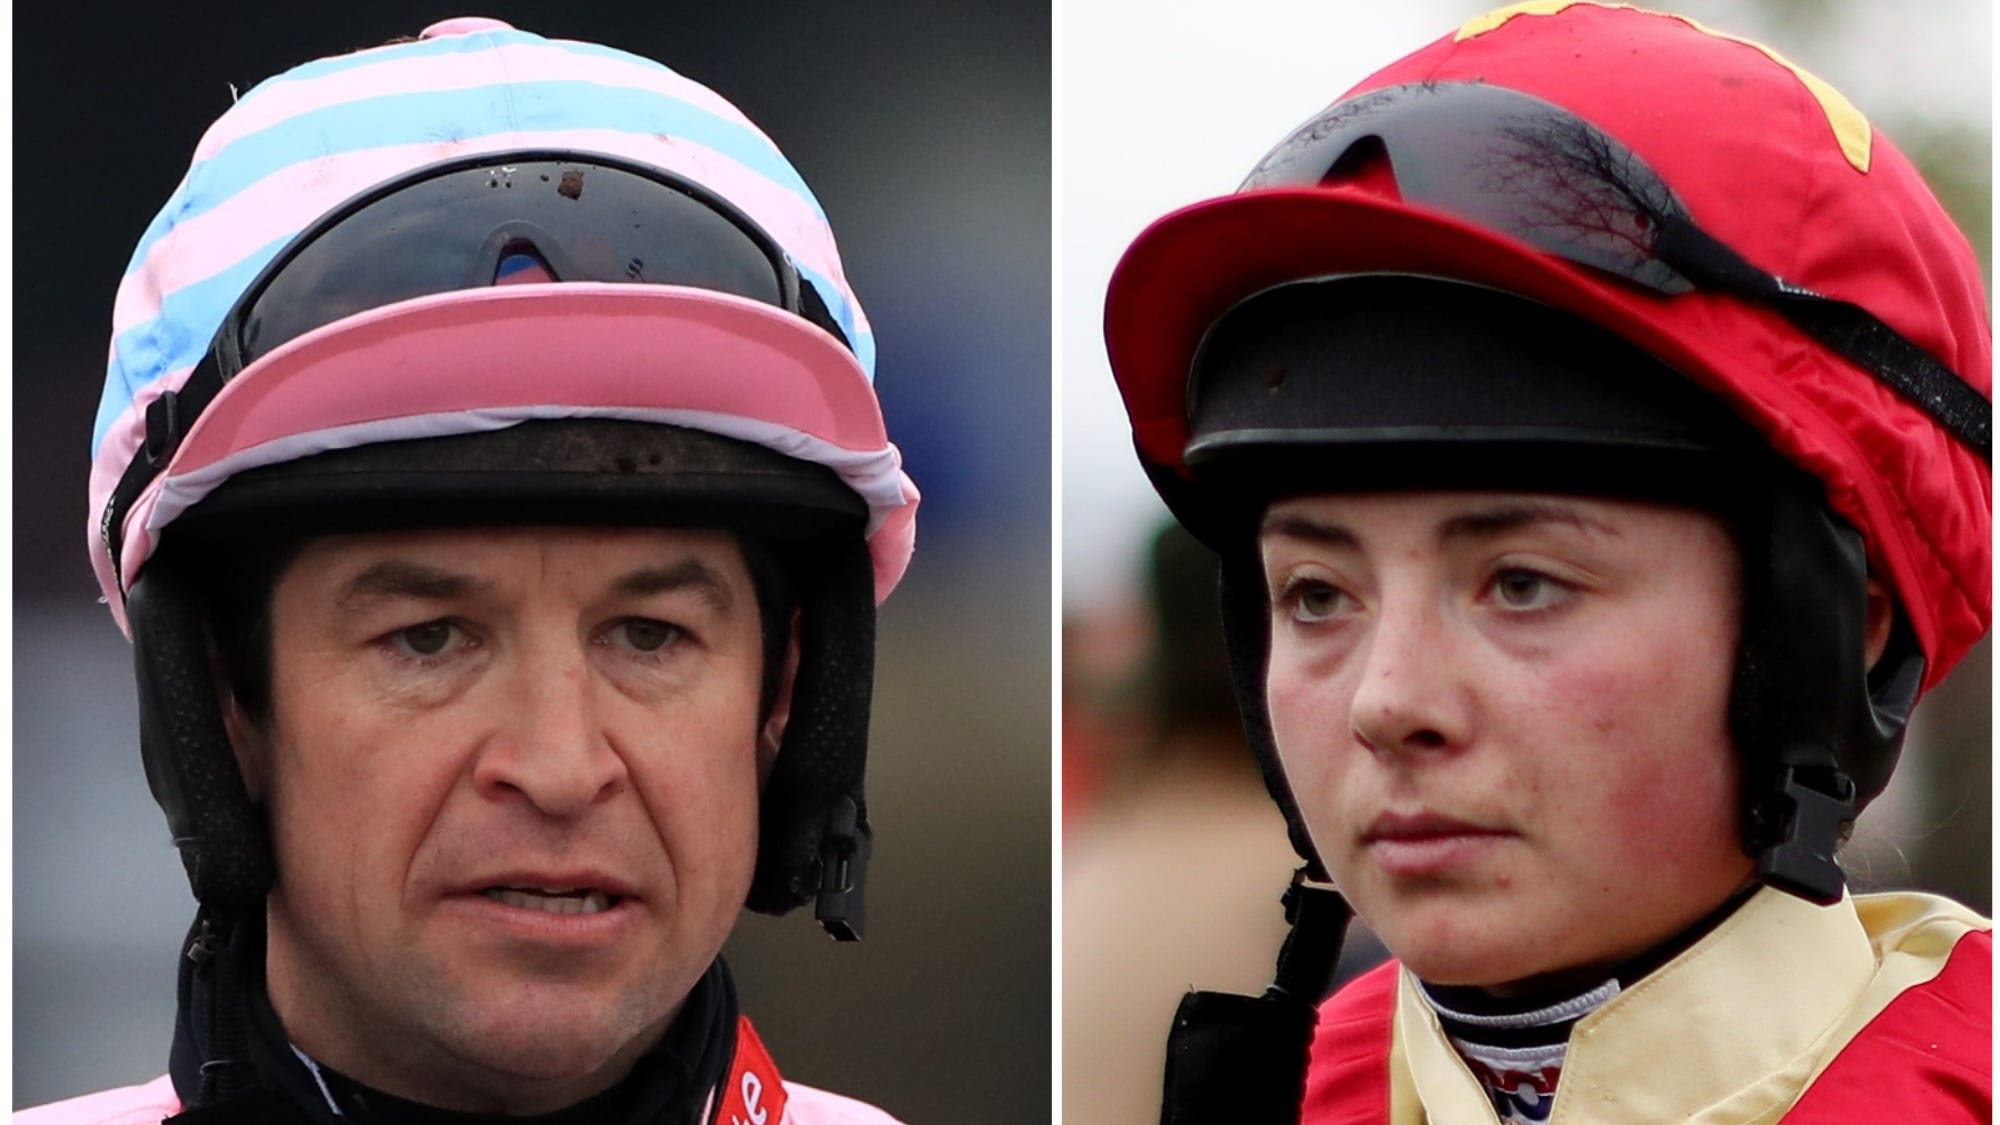  Bryony Frost and Robbie Dunne - (Pic: PA)